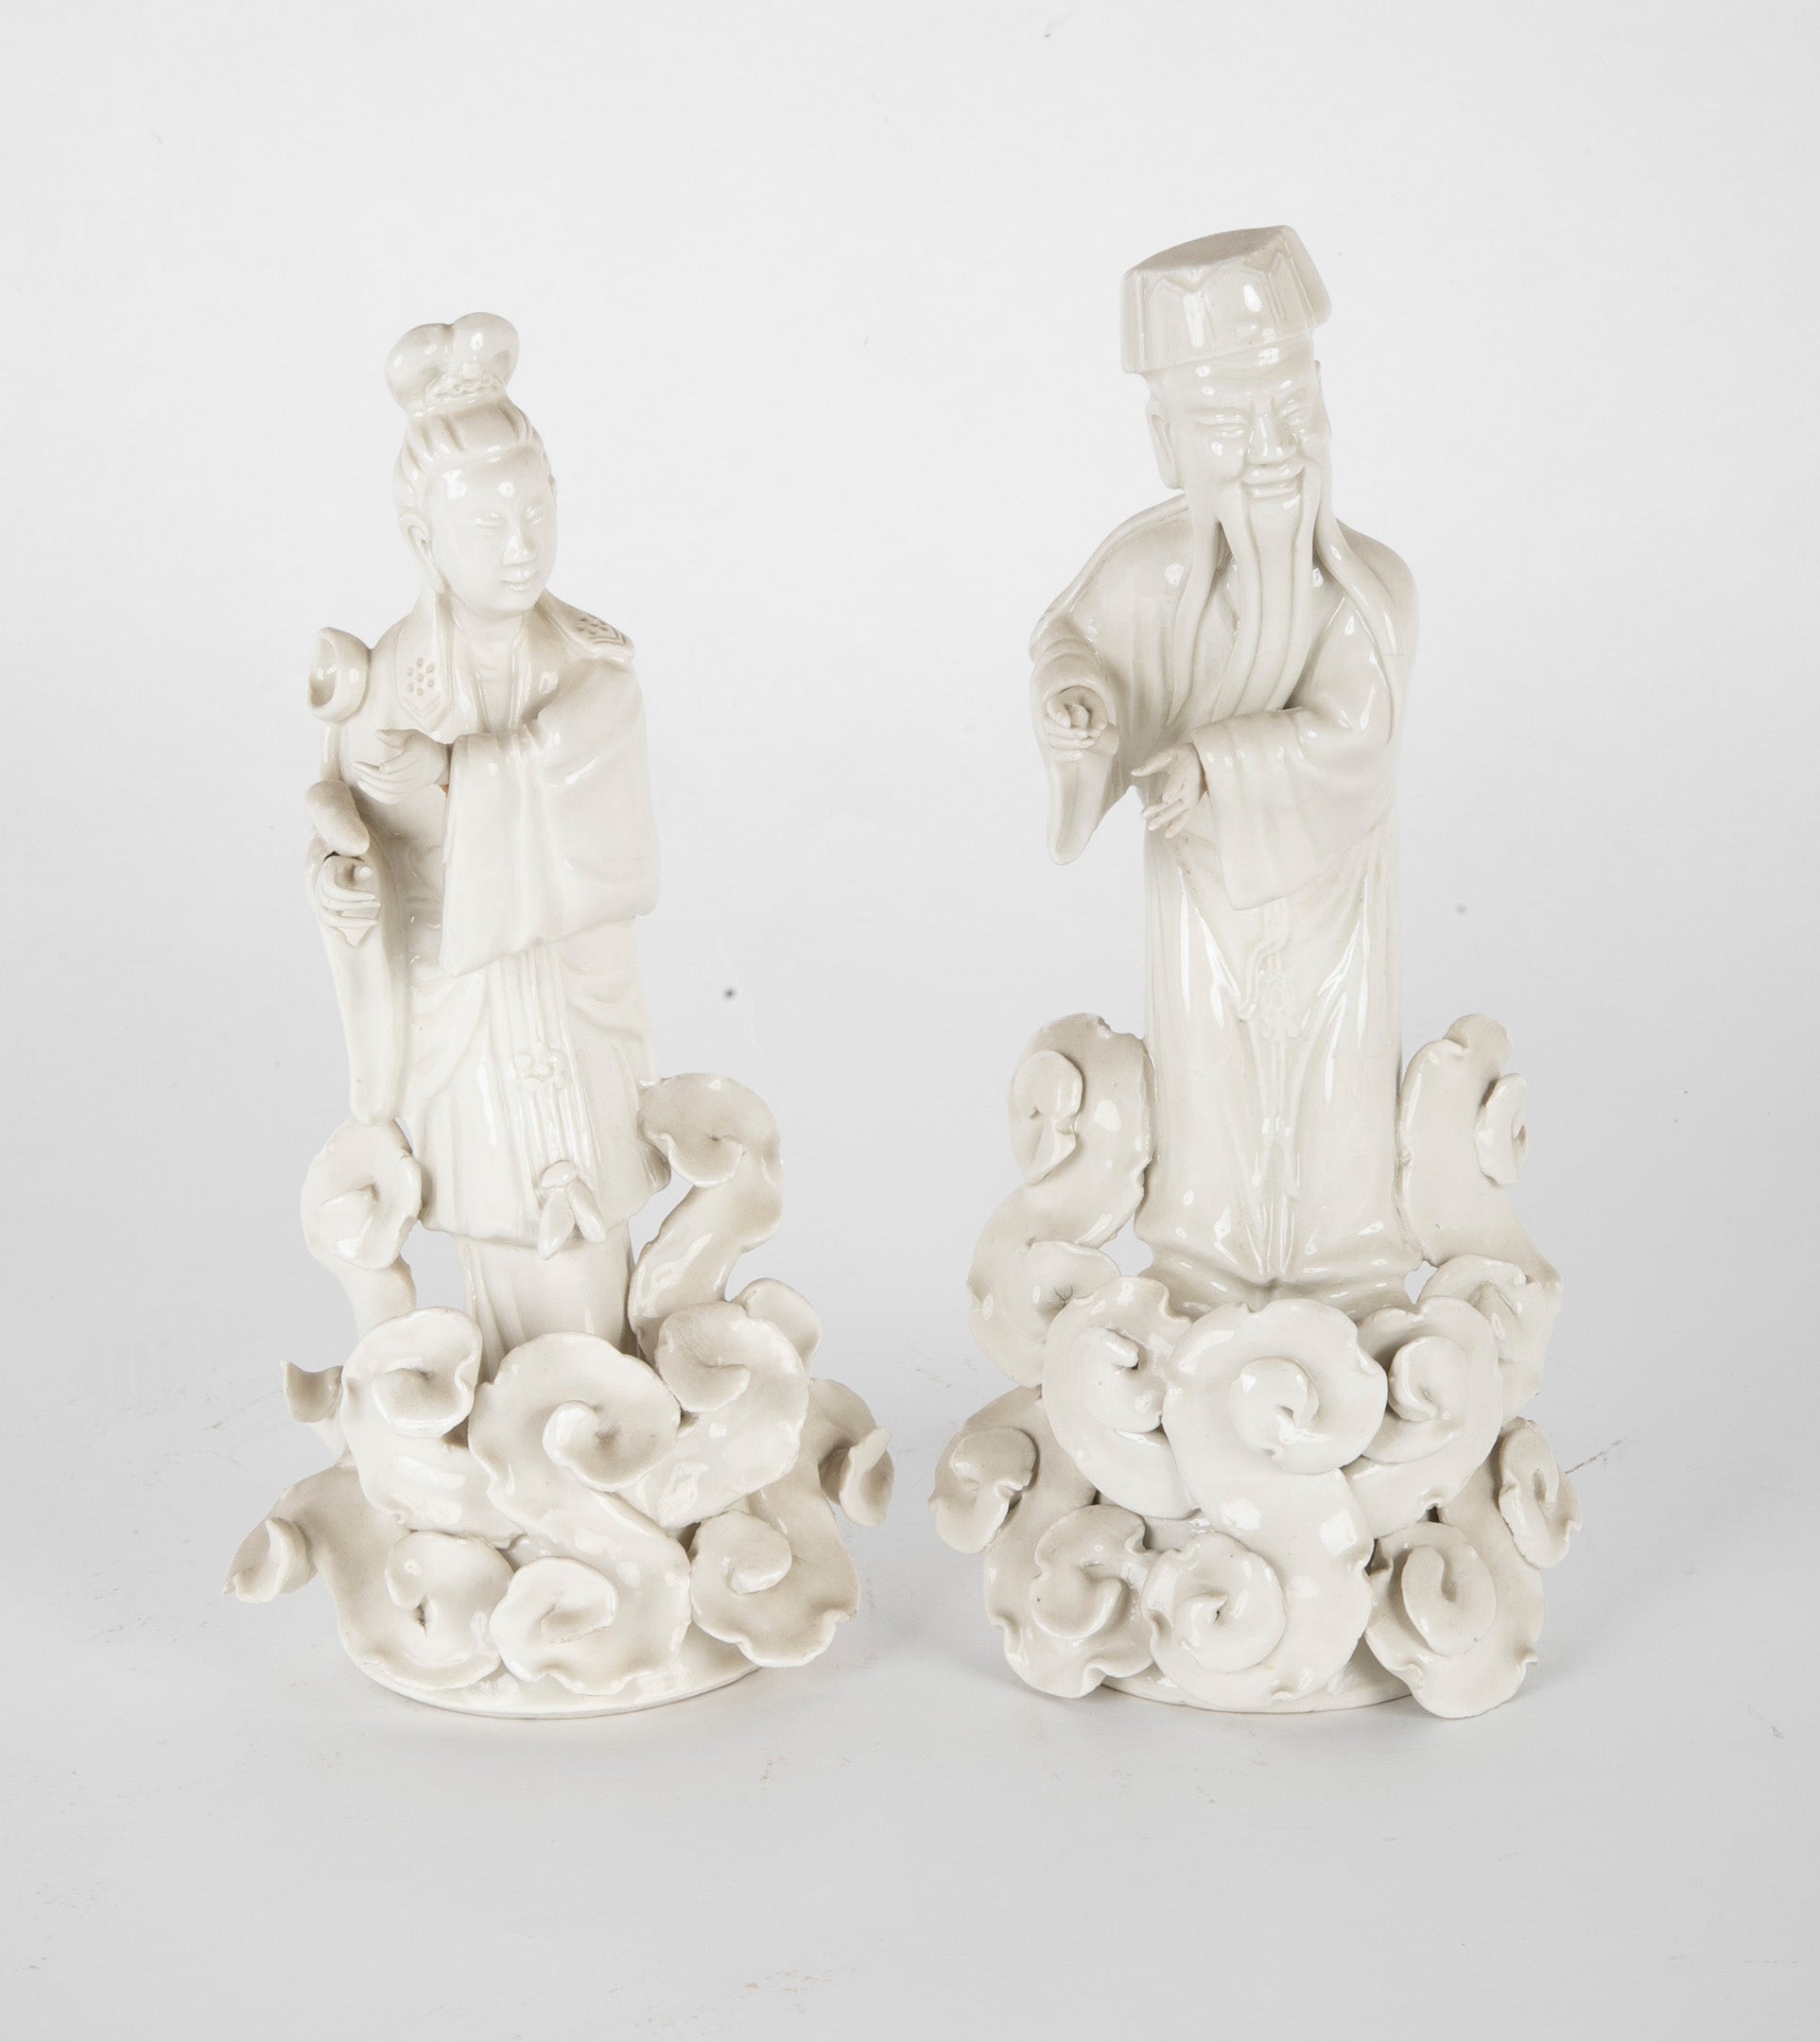 A Pair of Early 20th Century Chinese Blanc de Chine Figures